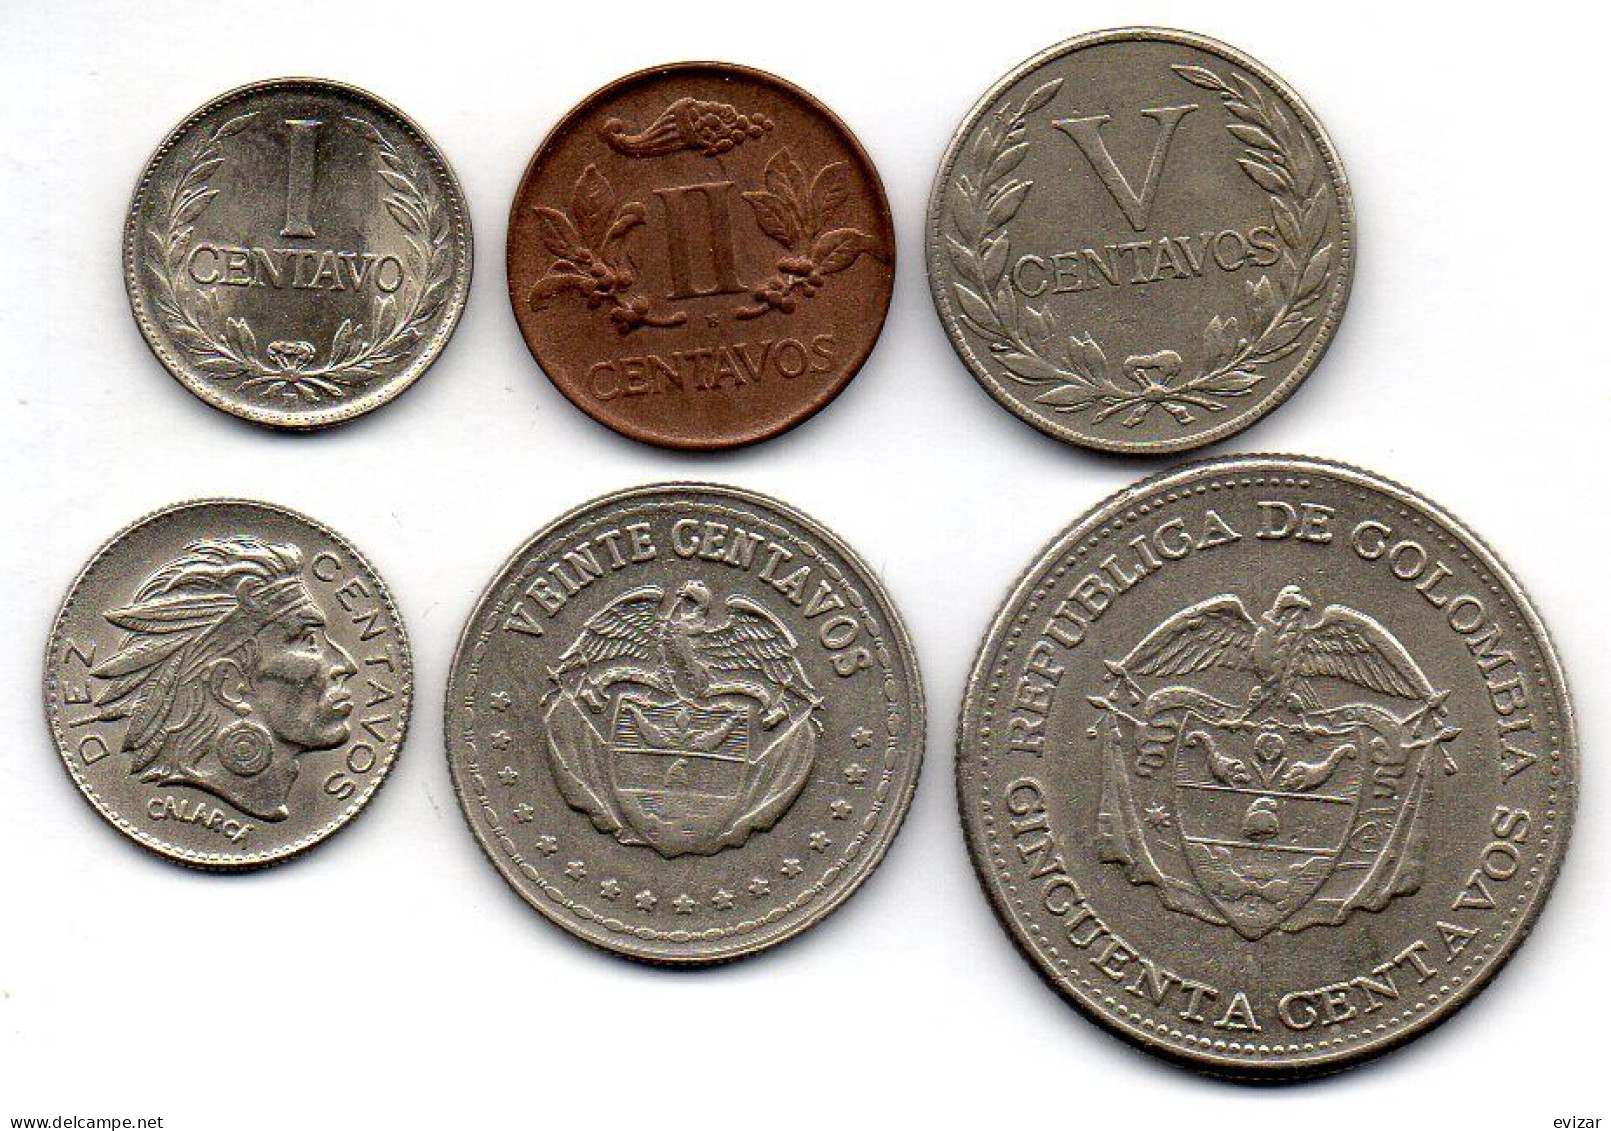 COLOMBIA, Set Of Six 1,2,5,10,20,50 Centavos, Copper-Nickel, Bronze, Year 1946-59, KM #275a, 210, 199, 212.1, 215.1, 217 - Colombia